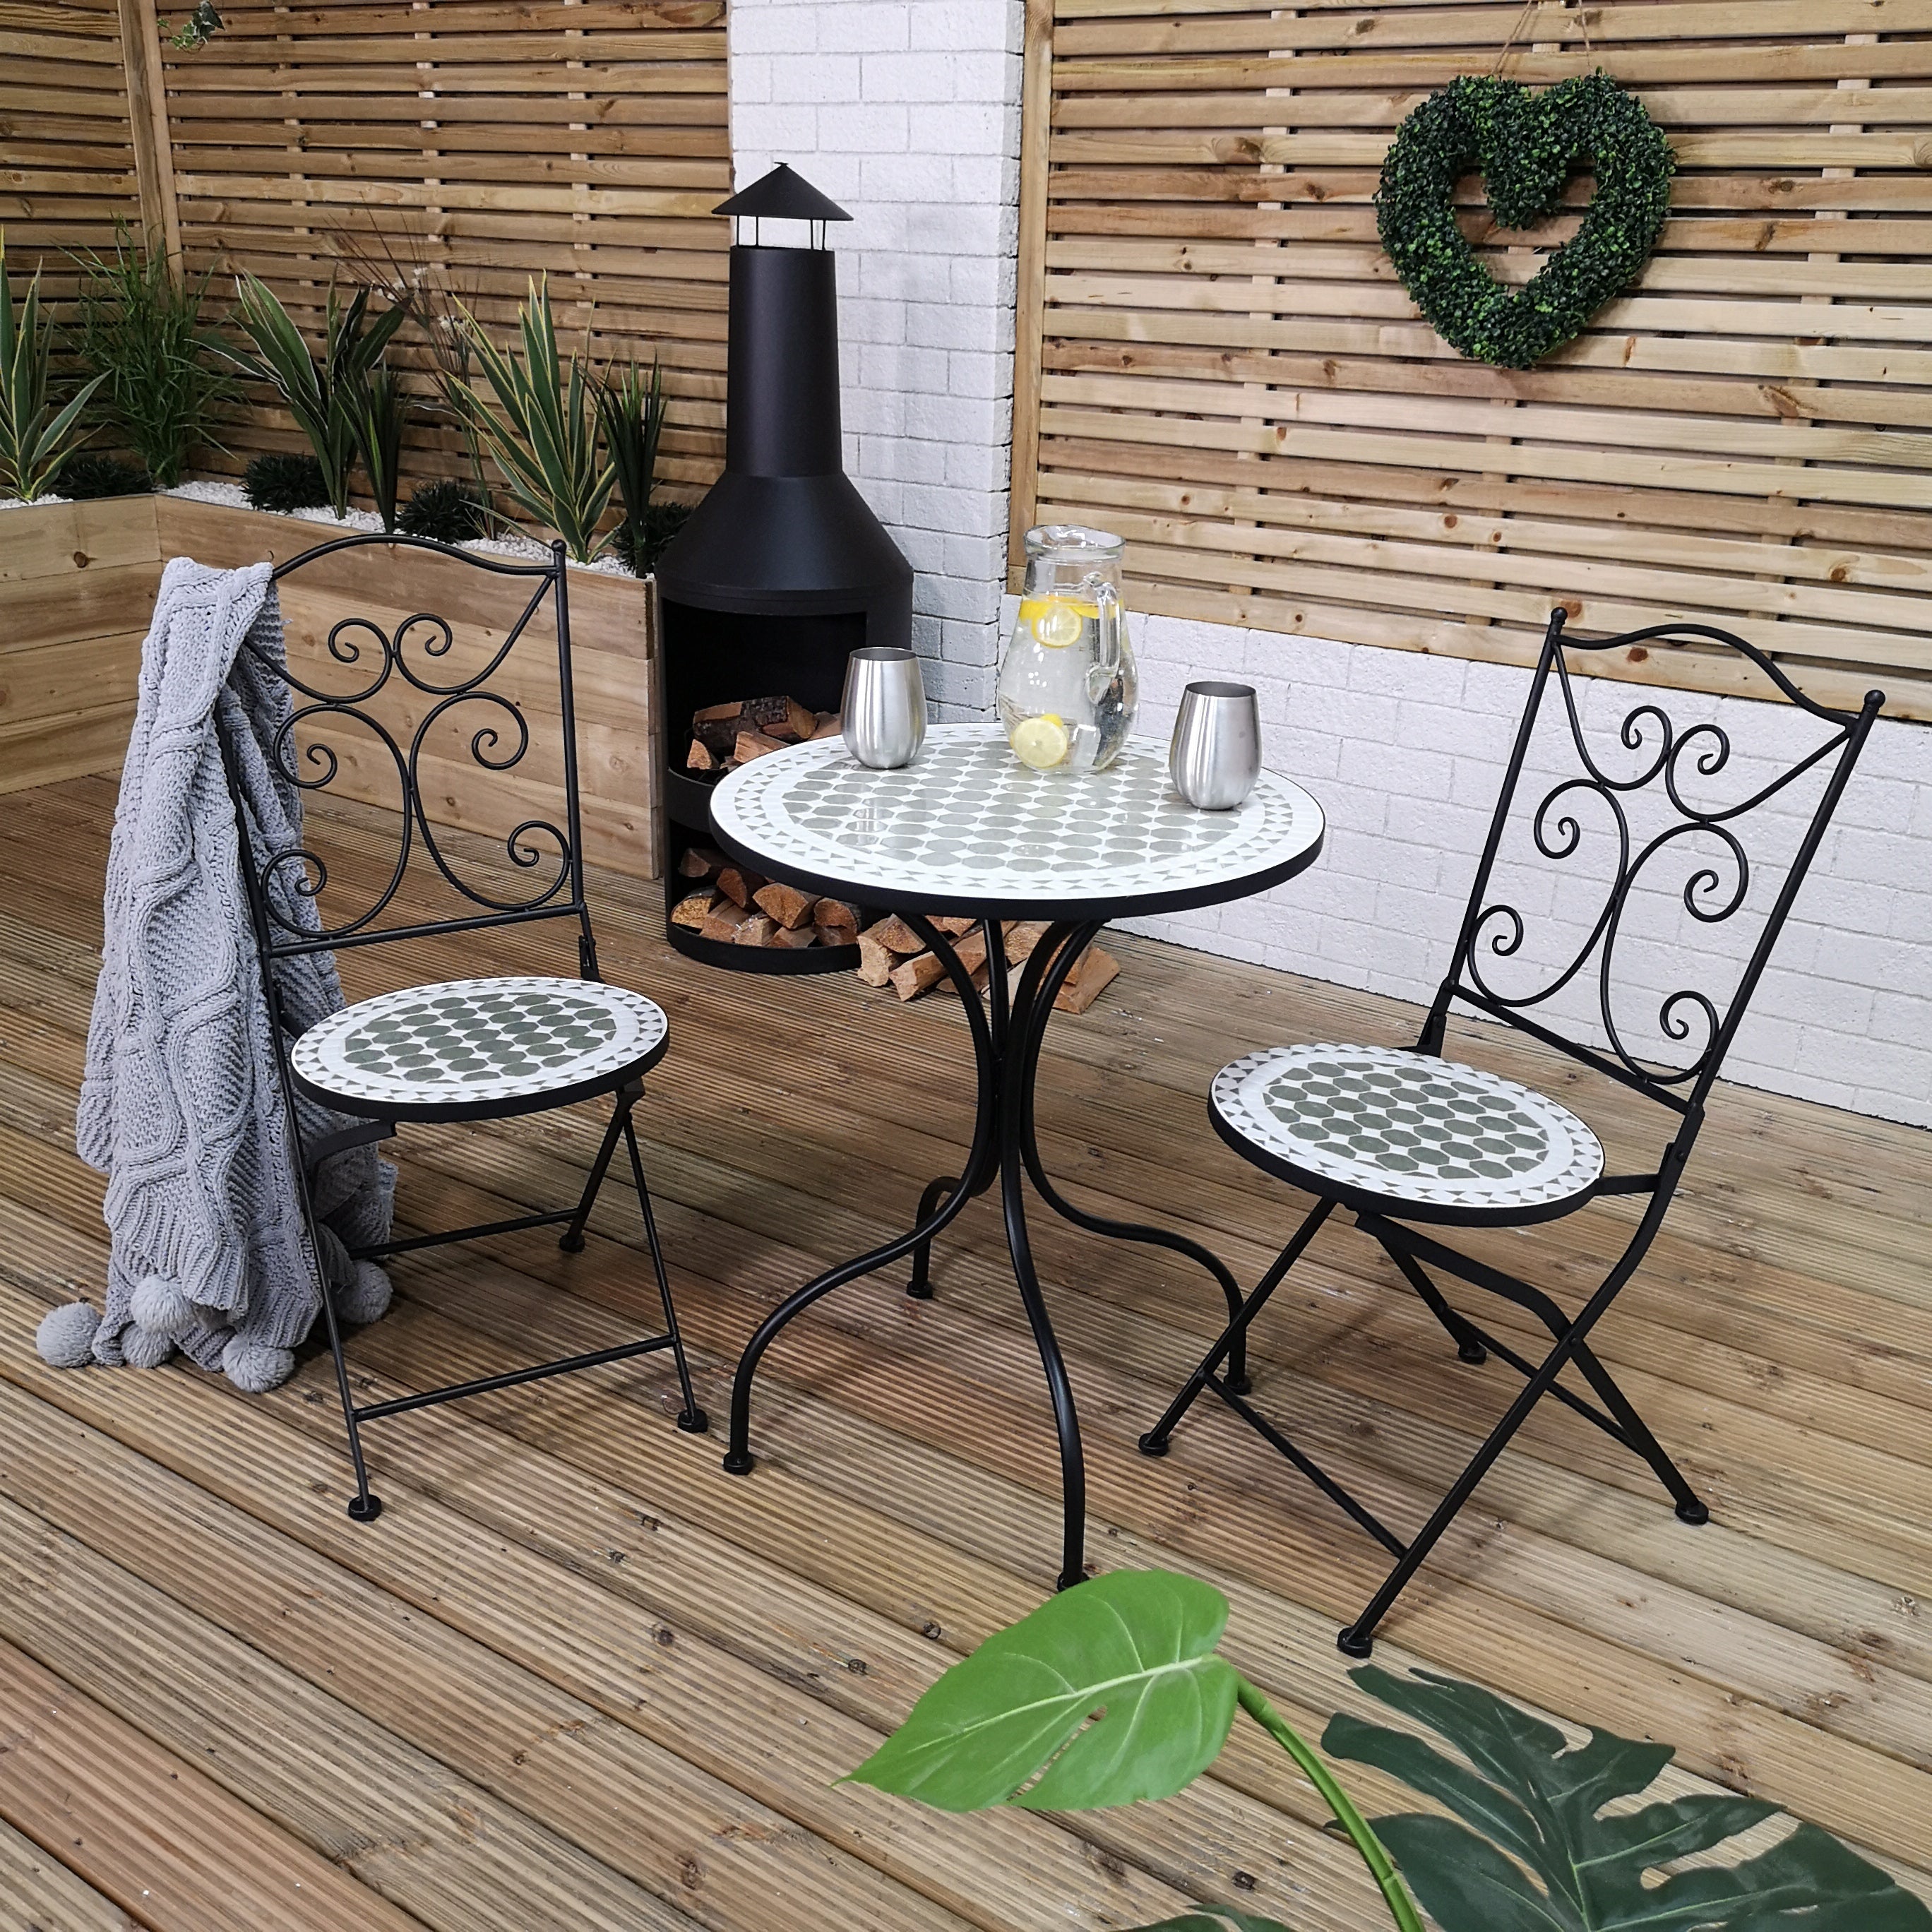 Outdoor Bistro Table and 2 Chairs Set Ceramic Design for Garden Patio Balcony